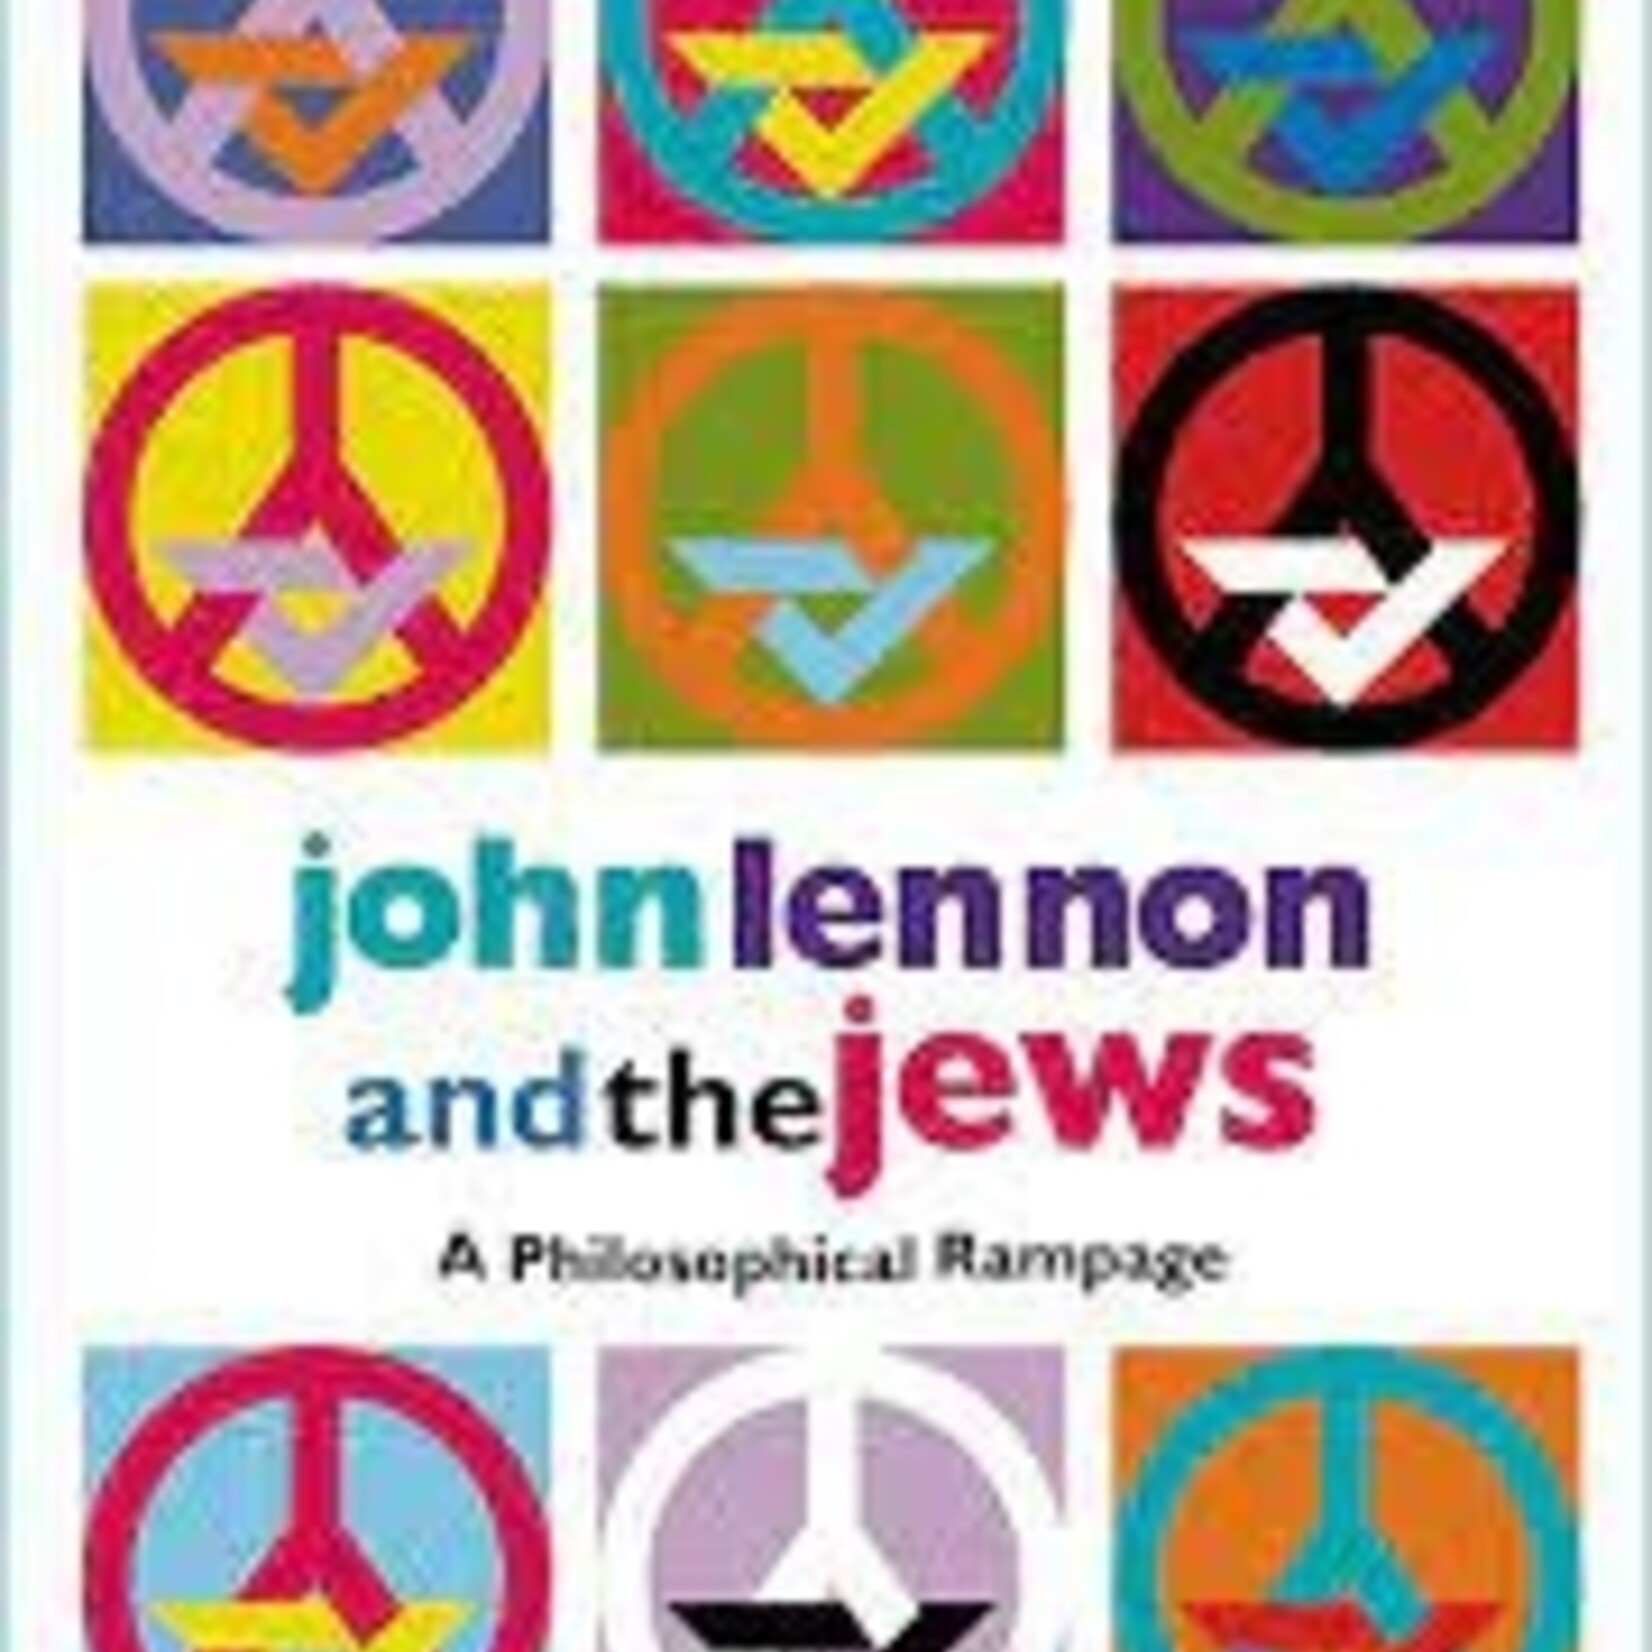 John Lennon and the Jews - A Philosophical Rampage